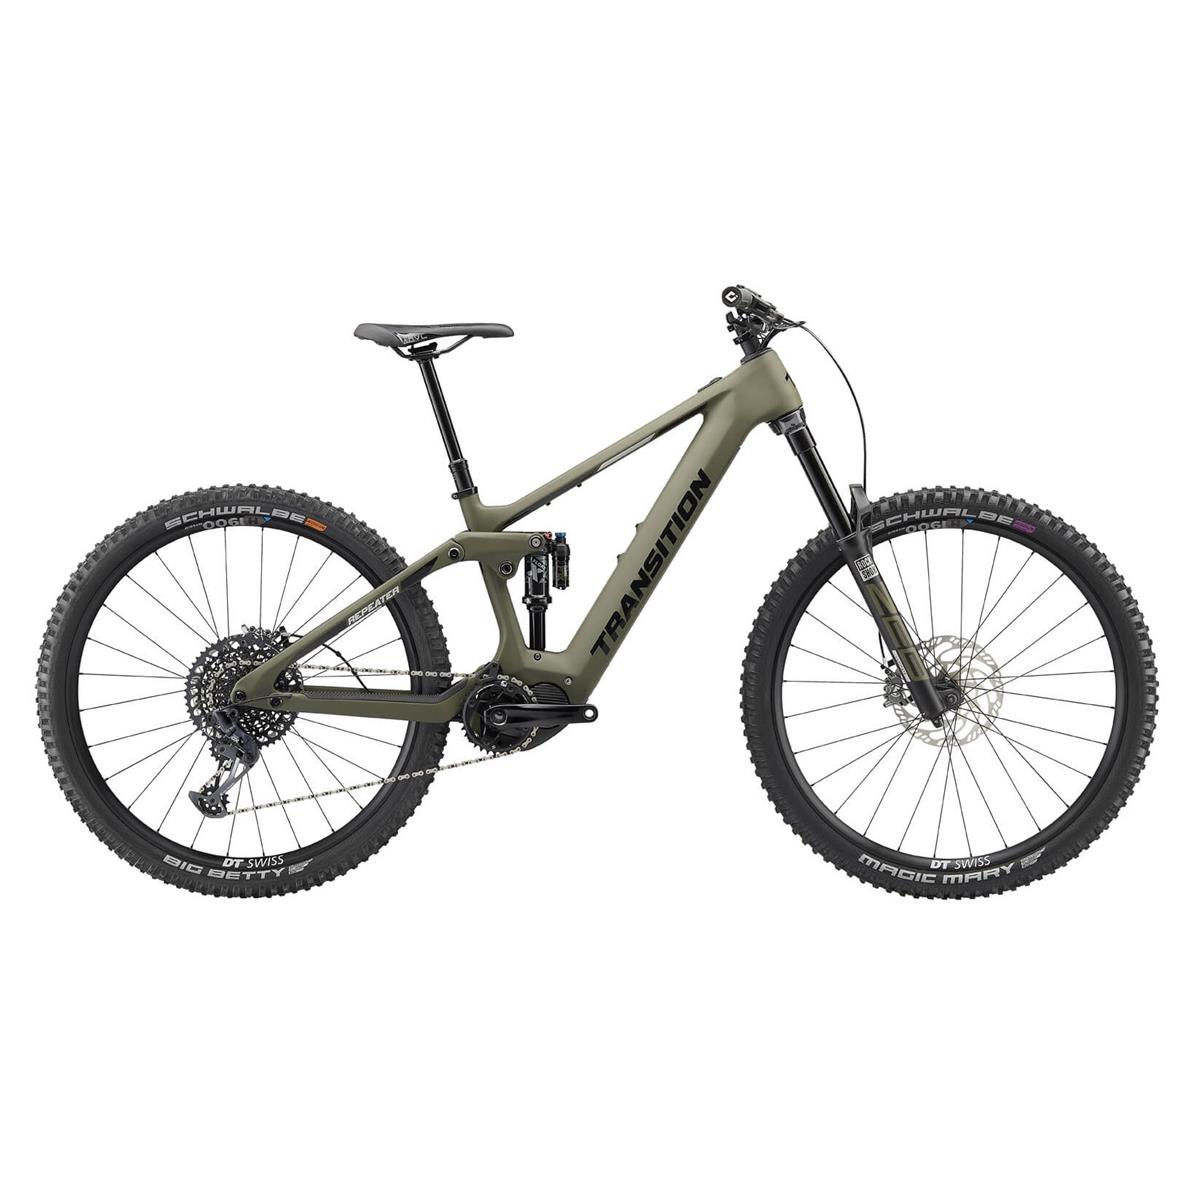 Repeater Carbon GX 29'' 160mm 12v 630Wh Shimano EP8 Mossy Green 2022 Taglia S